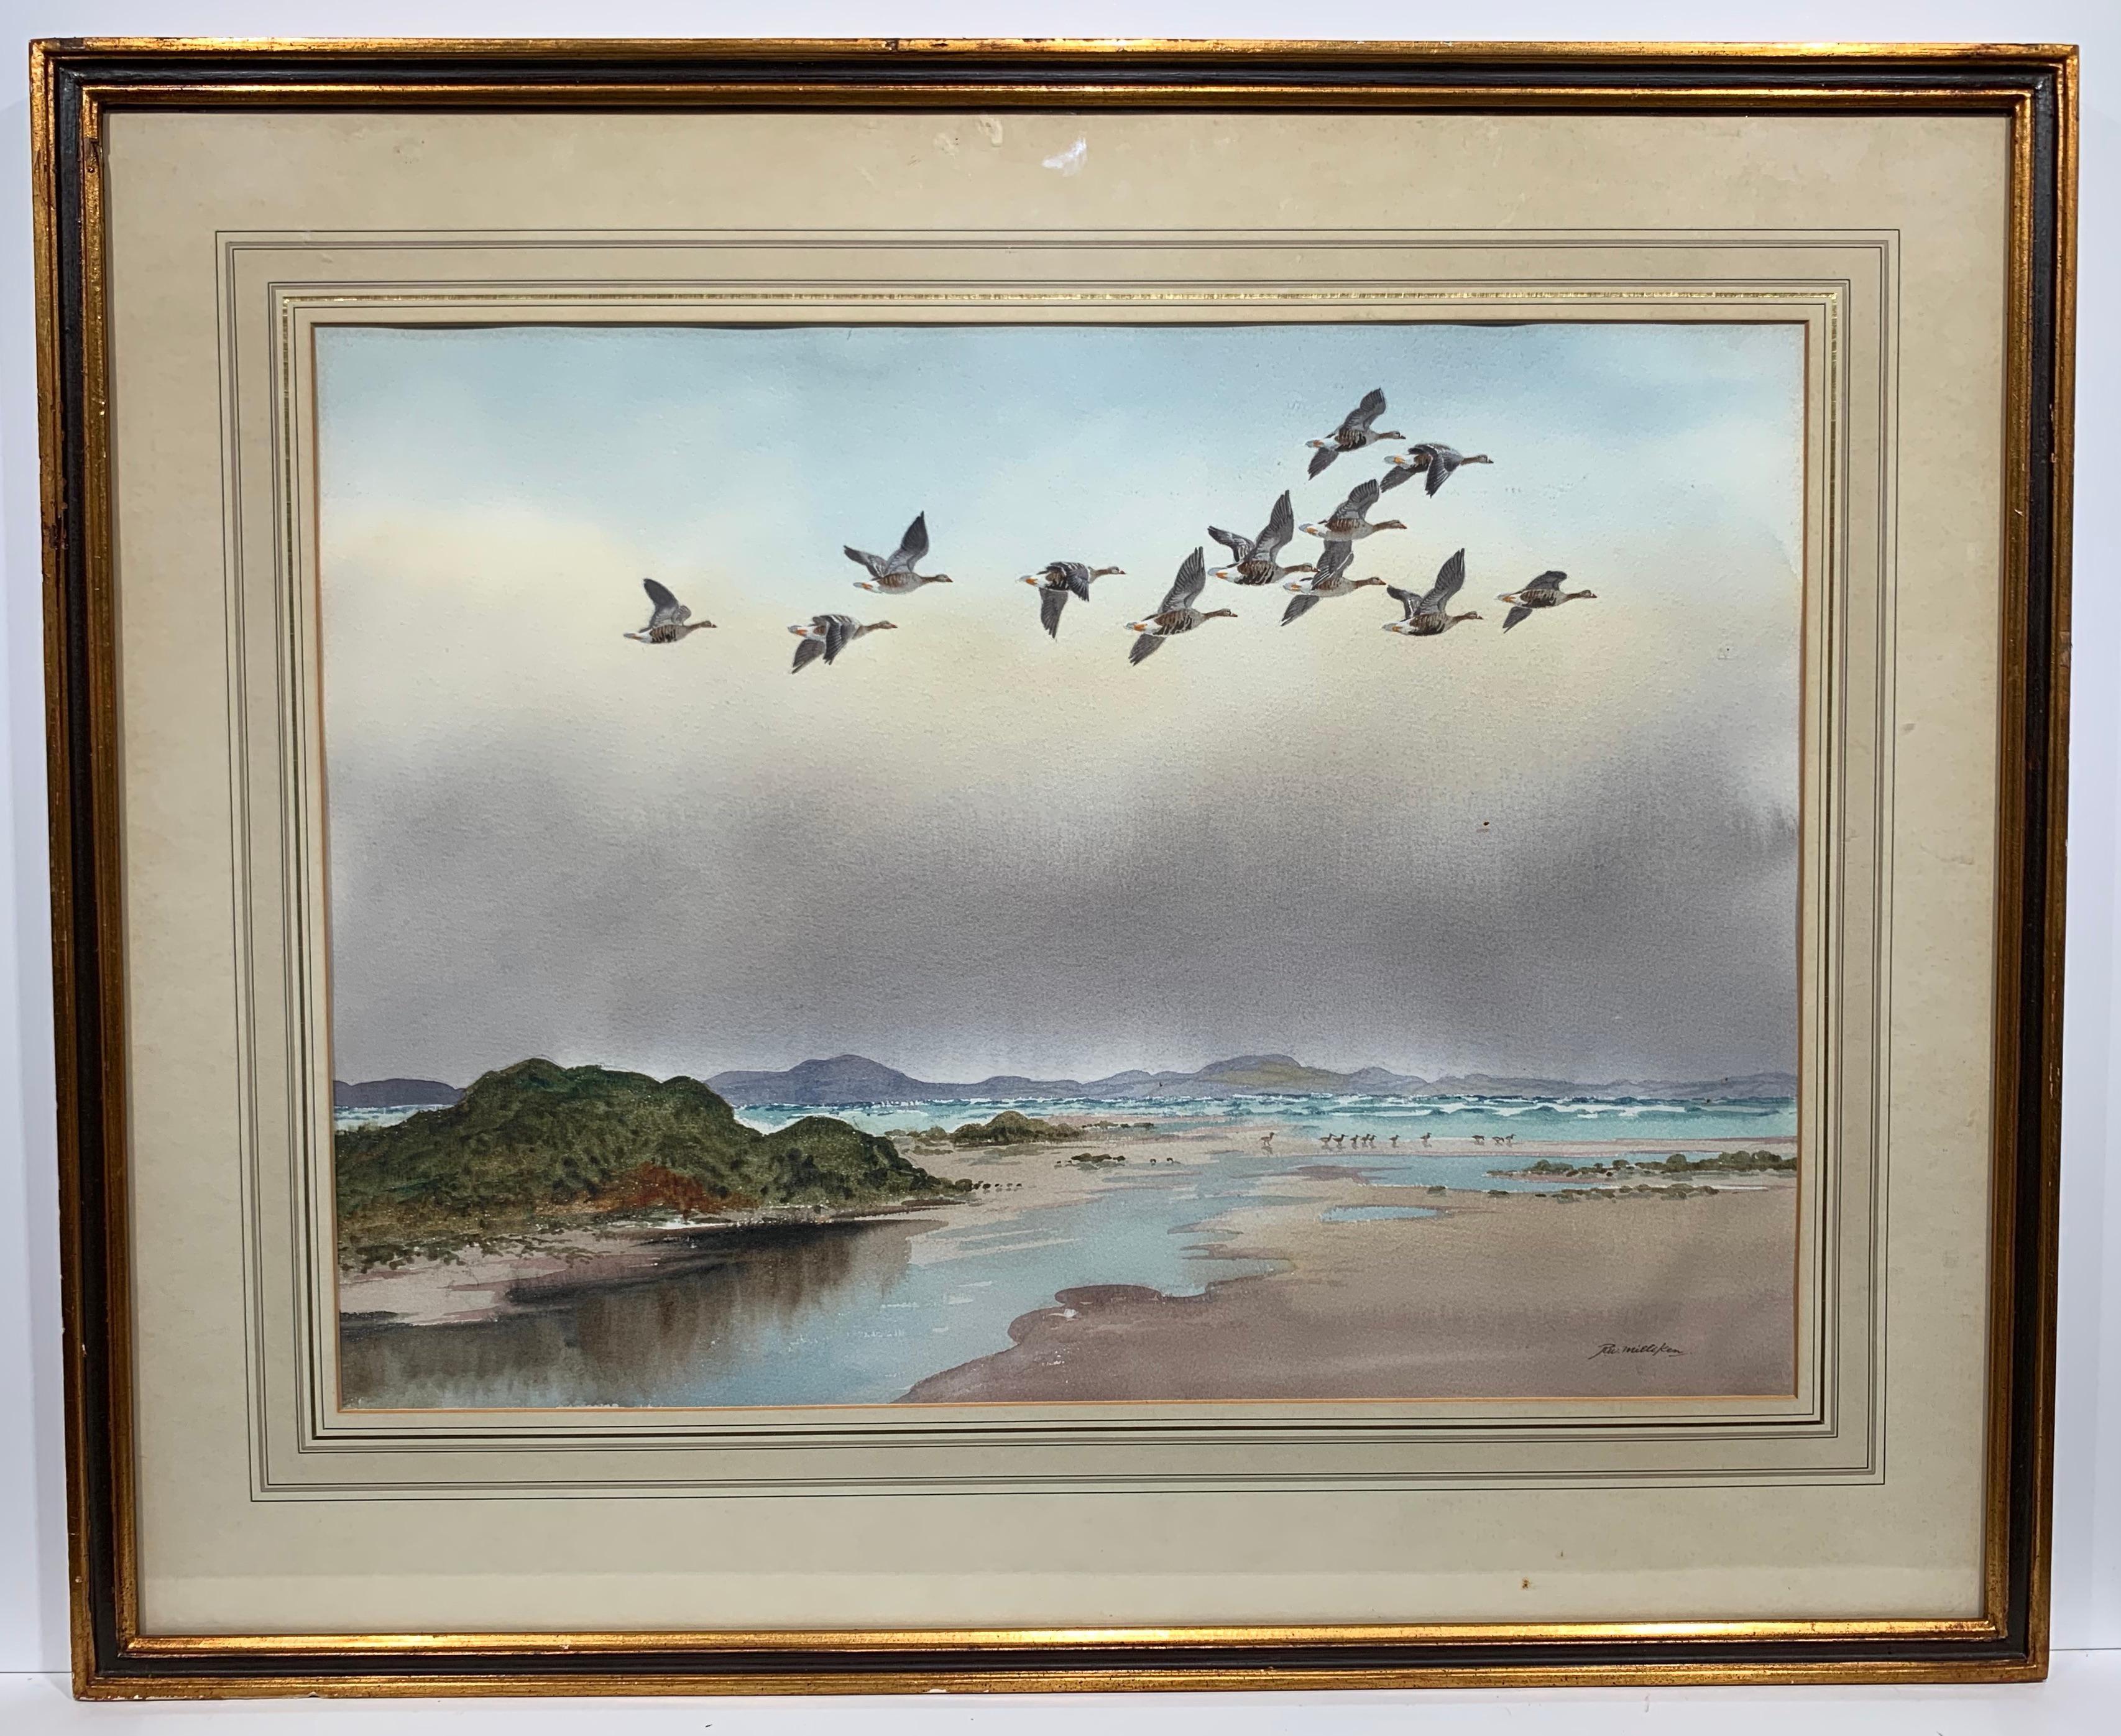 Robert W. Milliken Animal Art - White Fronts Along the Coast (White Fronted Geese, Ireland Landscape)